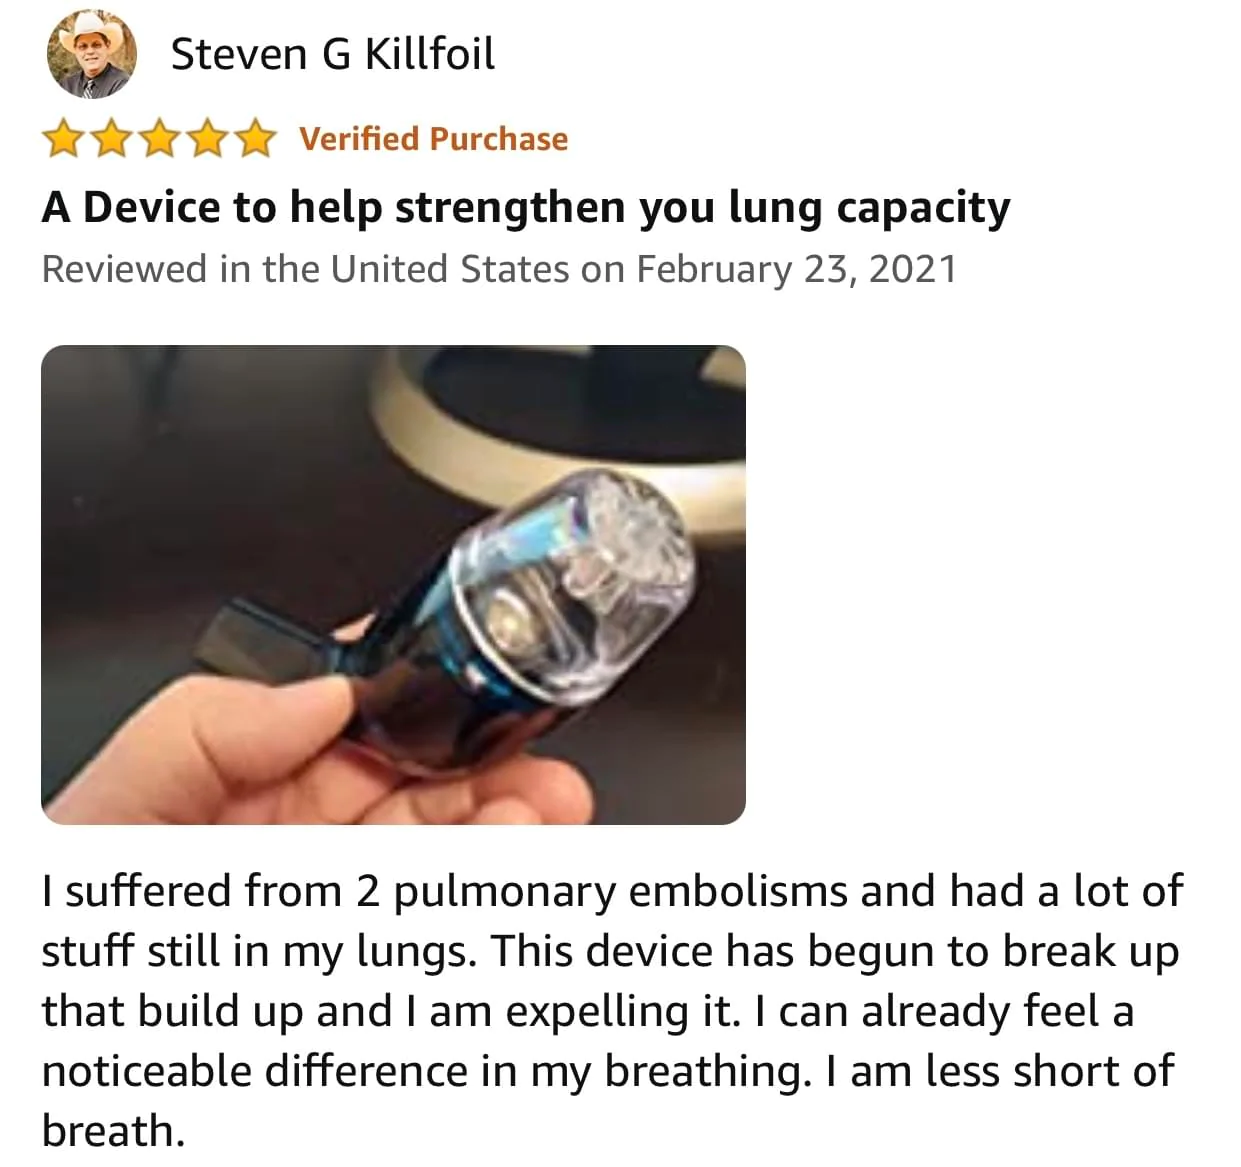 A device to help strengthen you lung capacity